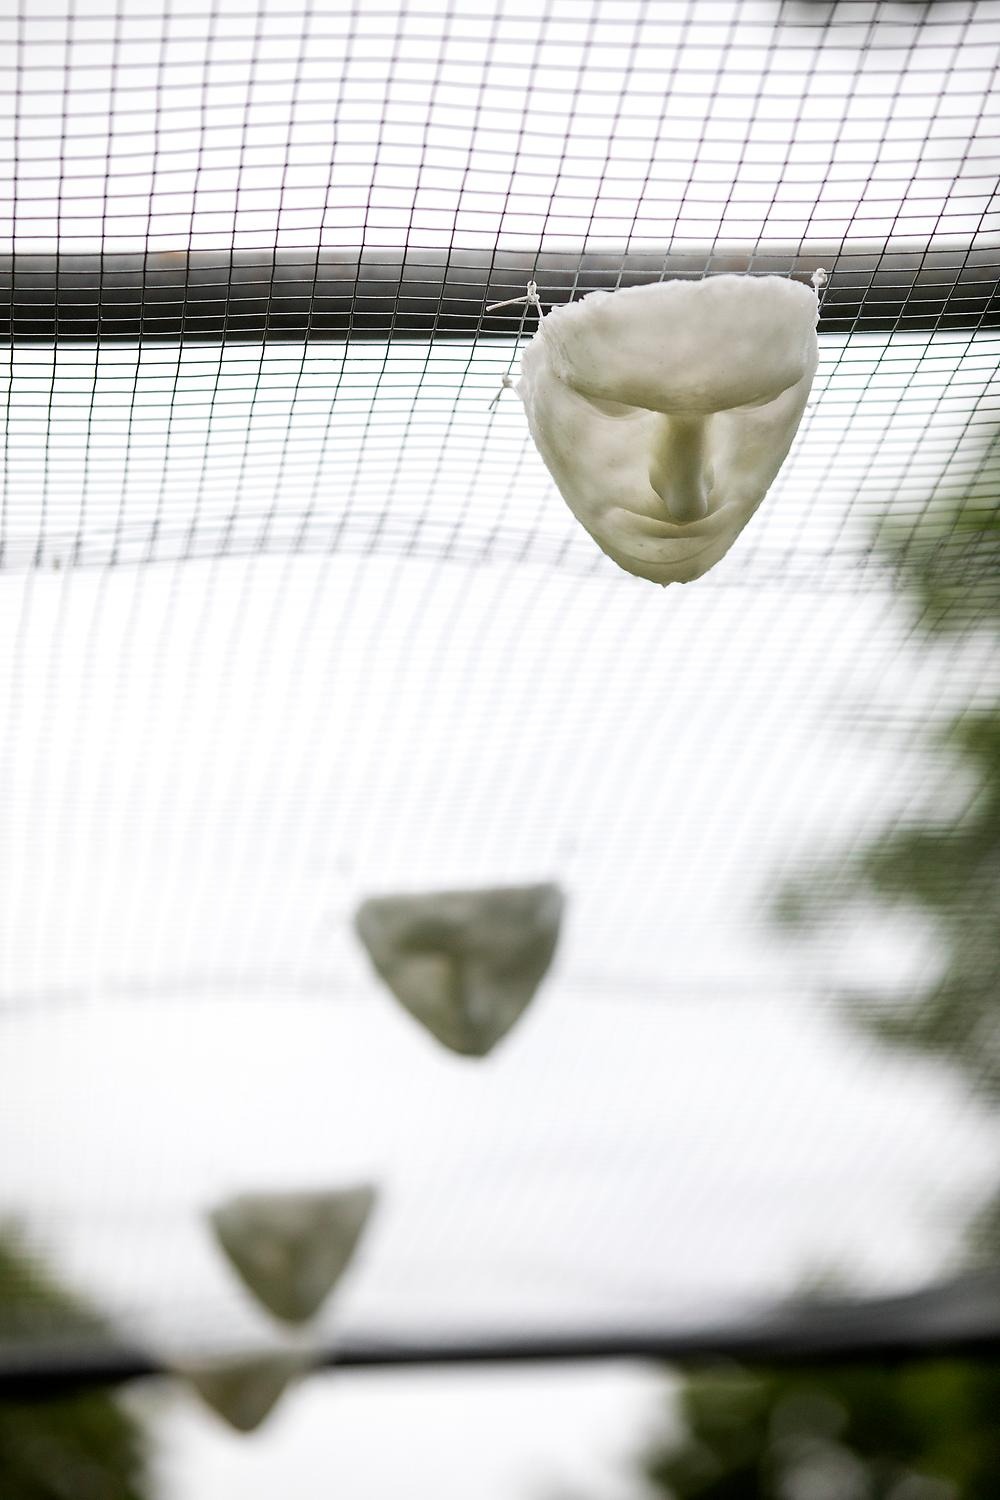 A close-up of one of the white masks hanging from the net and looking down.